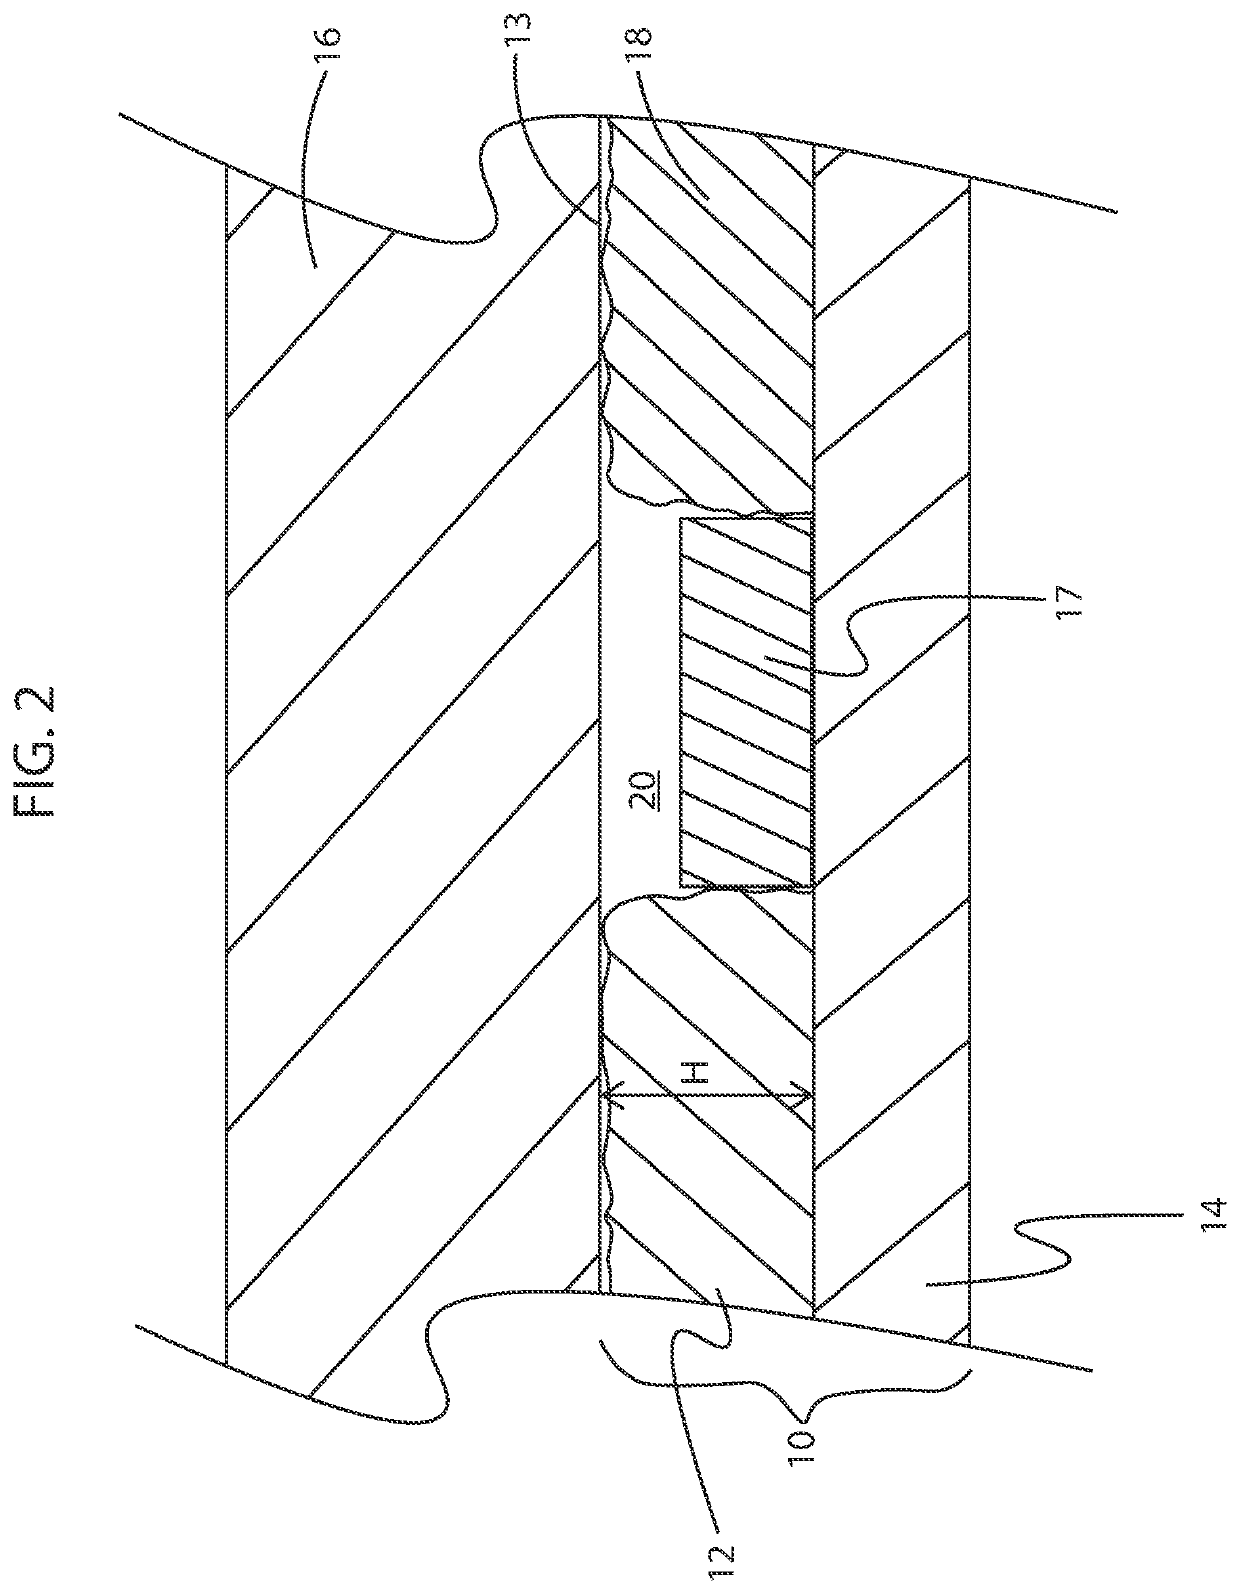 Uvc sanitation device and system for footwear and apparel and related methods